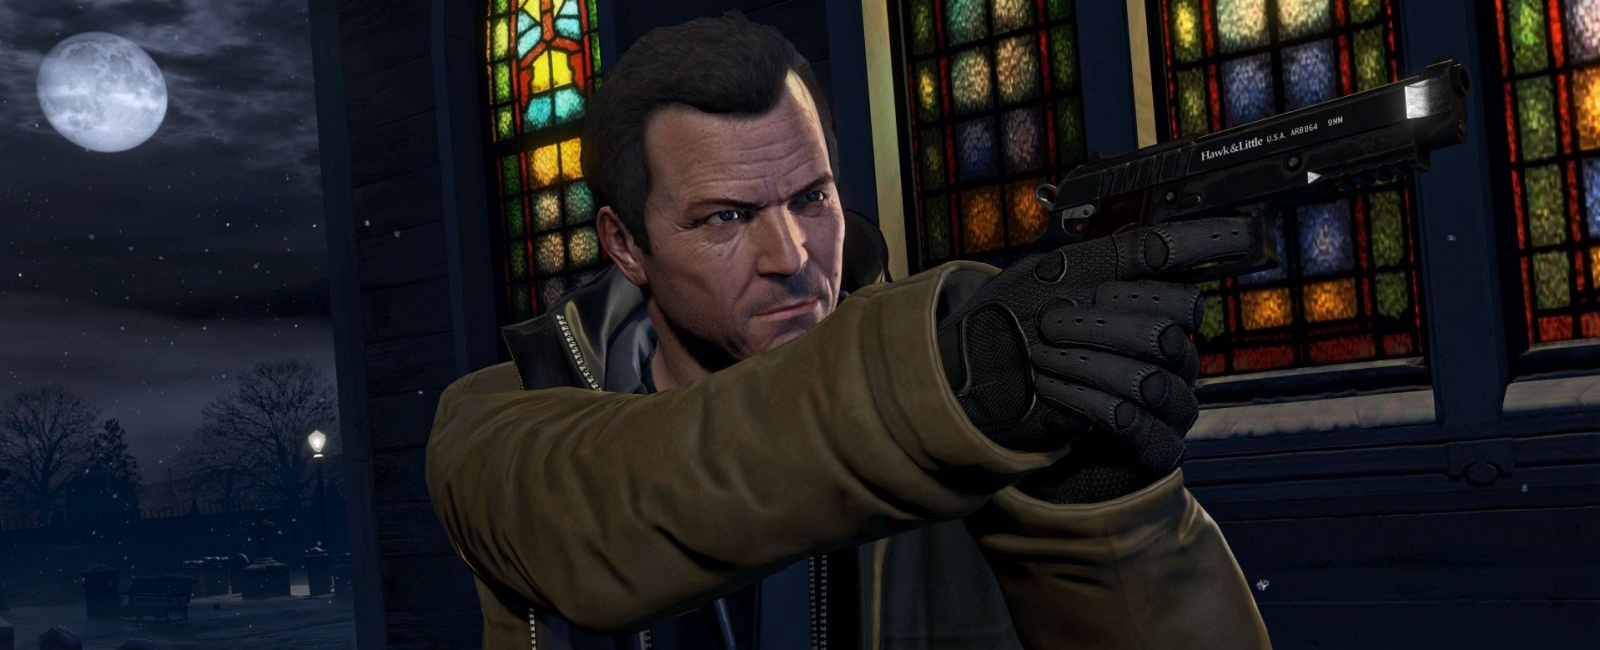 GTA 5 Cheats PS5, PS4, and PS3 - Player Assist